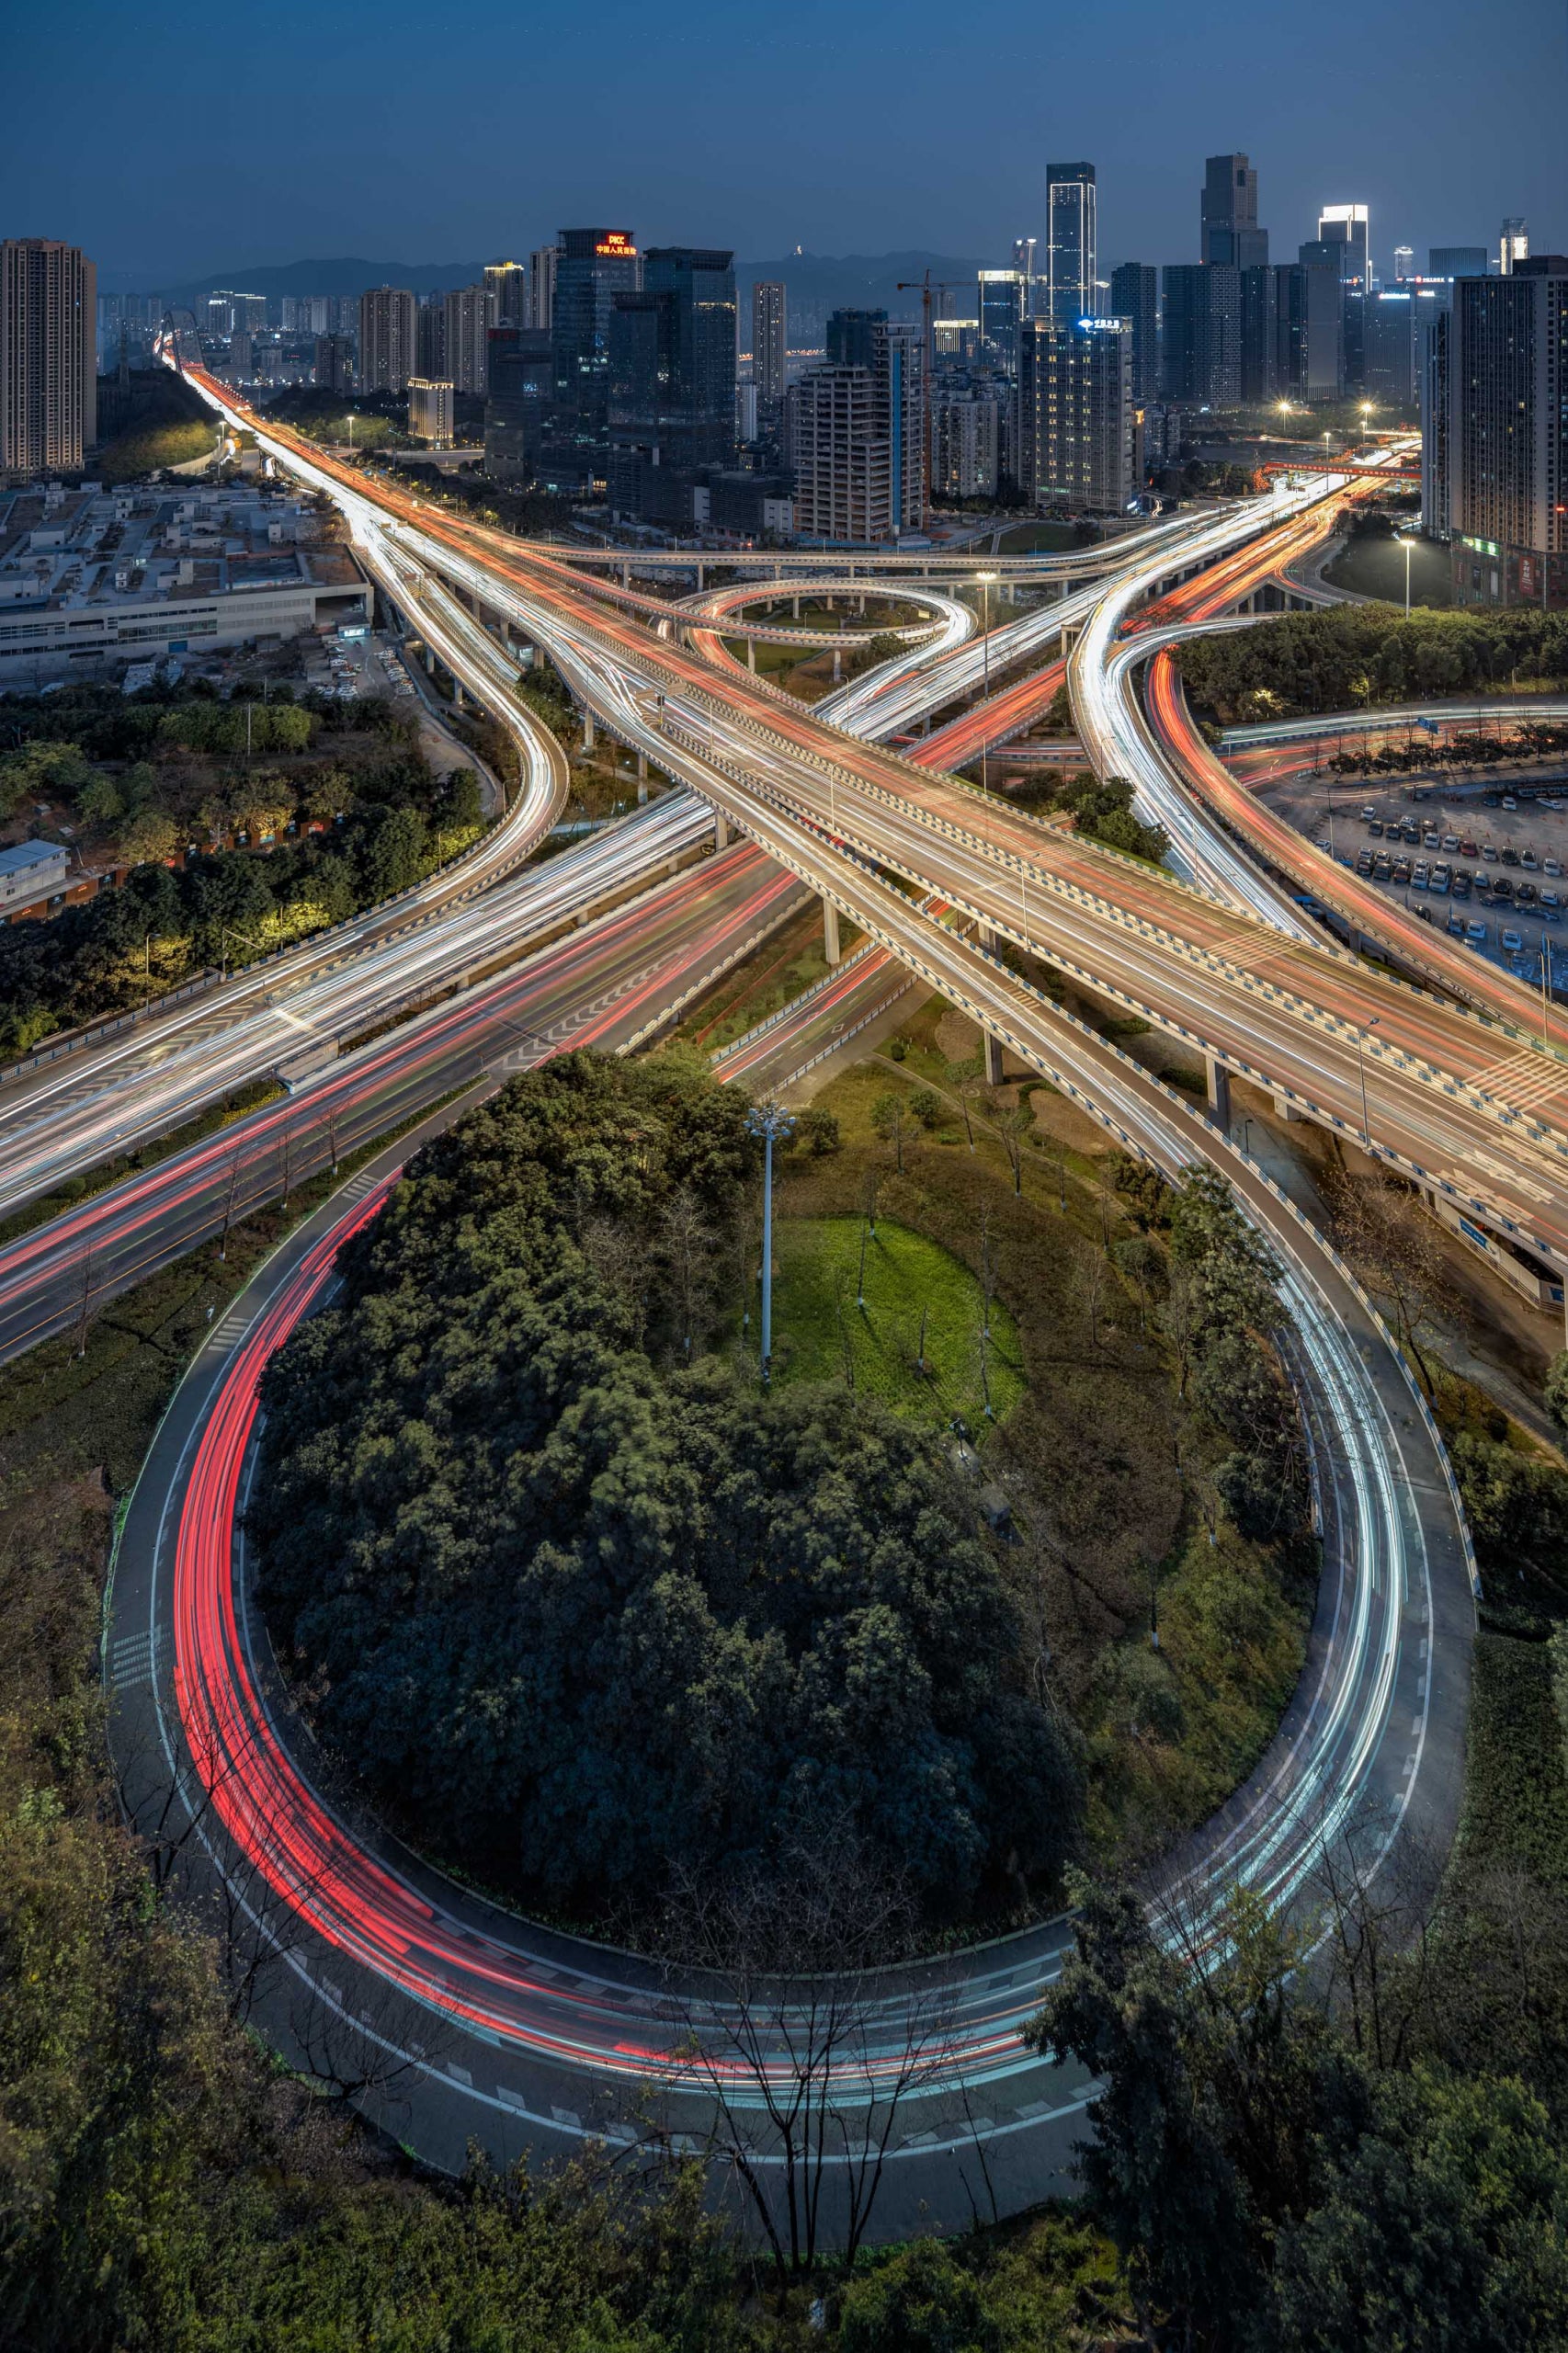 A long exposure sample of a city and highway with car light trails.